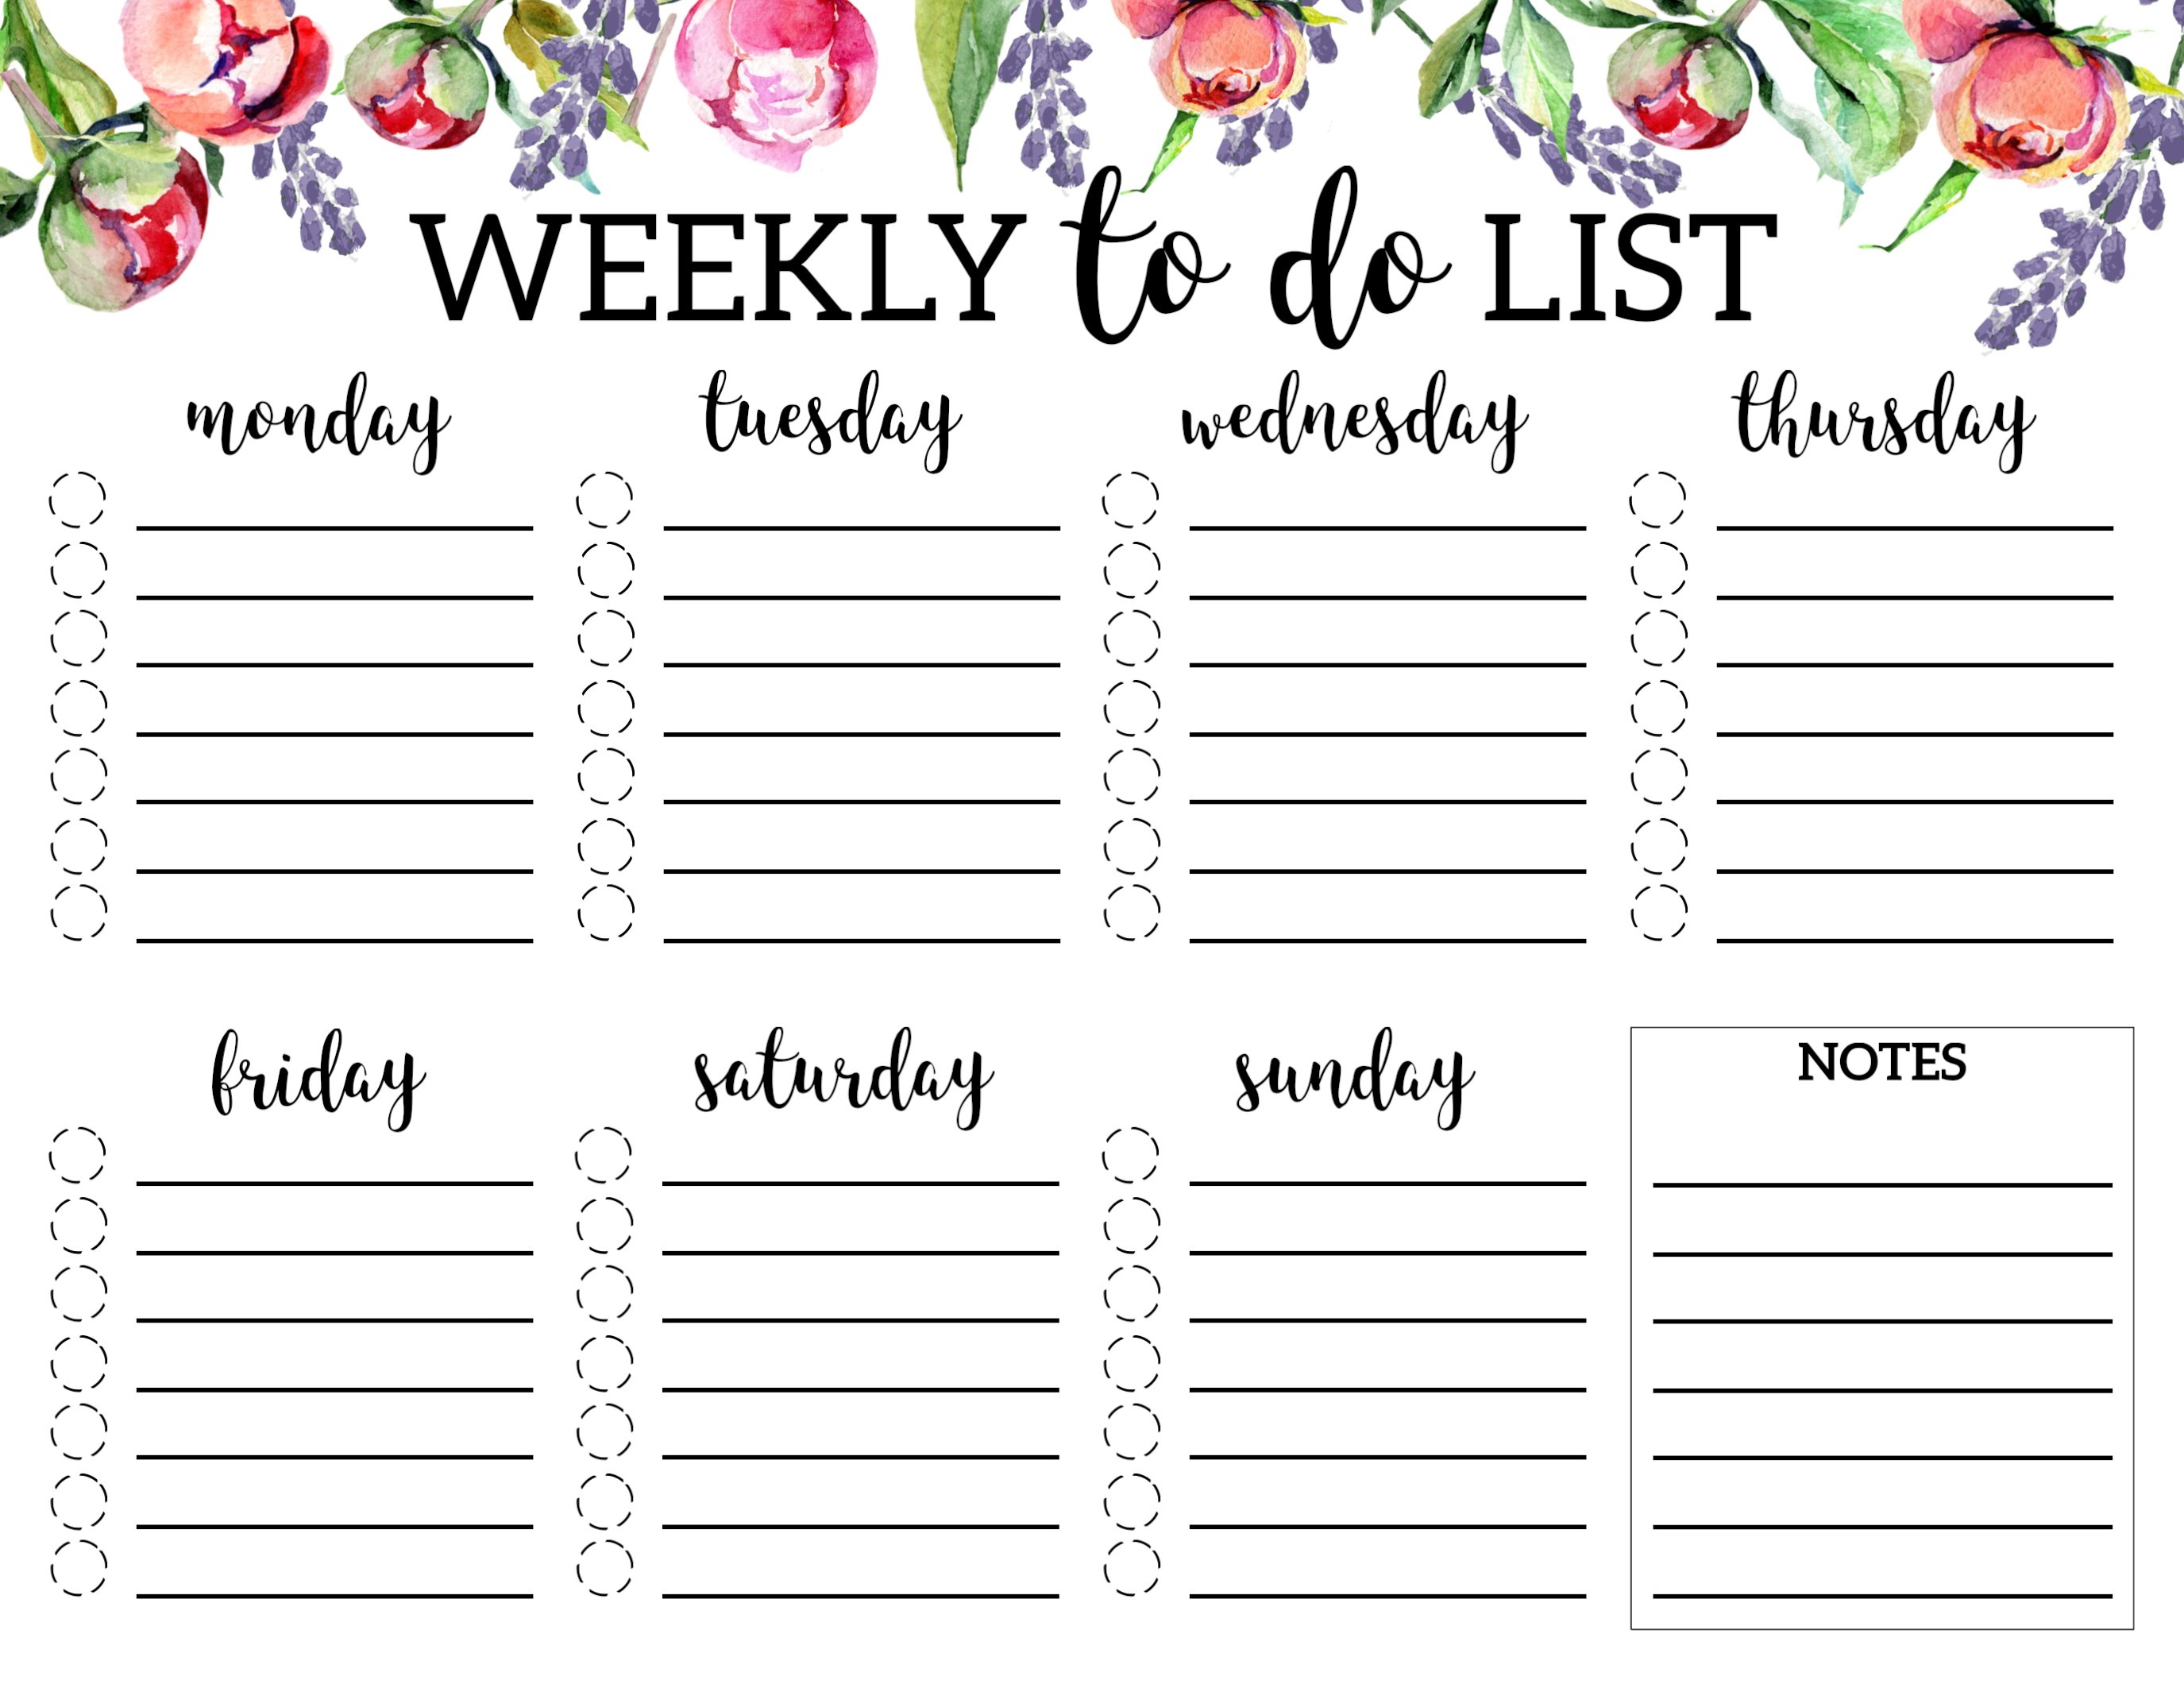 Floral Weekly To Do List Printable Checklist Template - Paper Trail - Weekly To Do List Free Printable